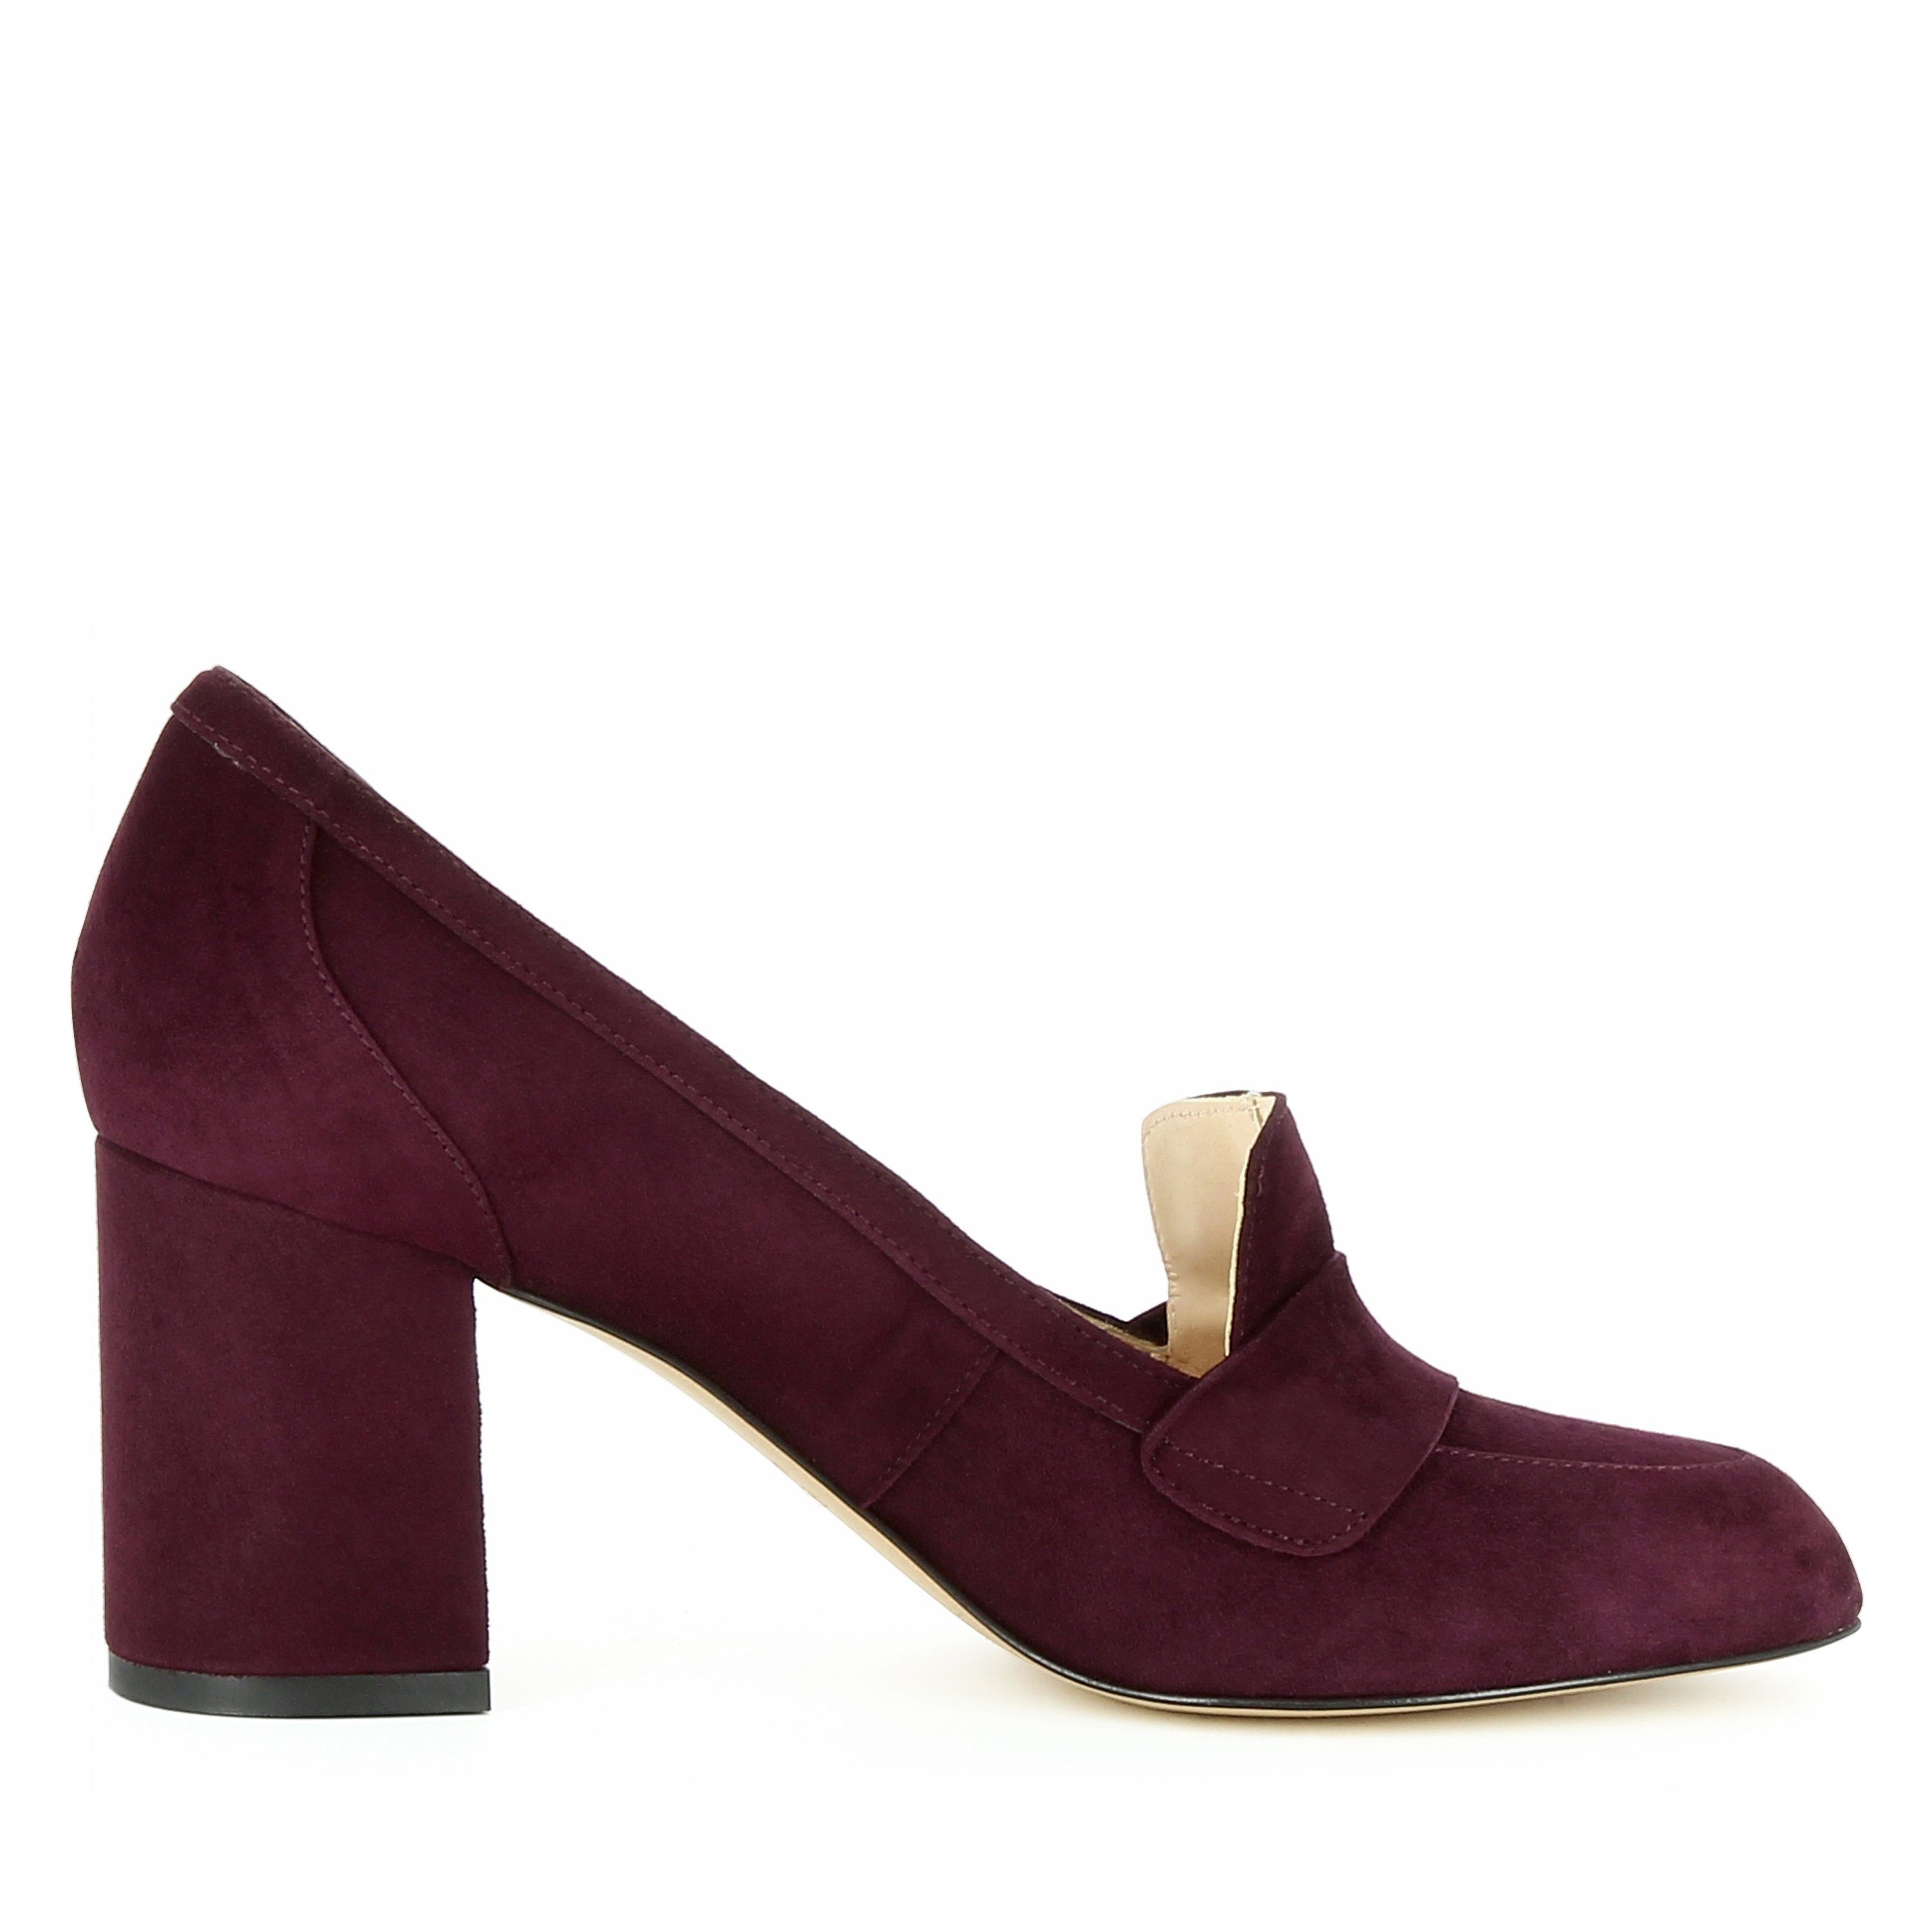 Evita NELLY Pumps bordeaux Italy in Handmade